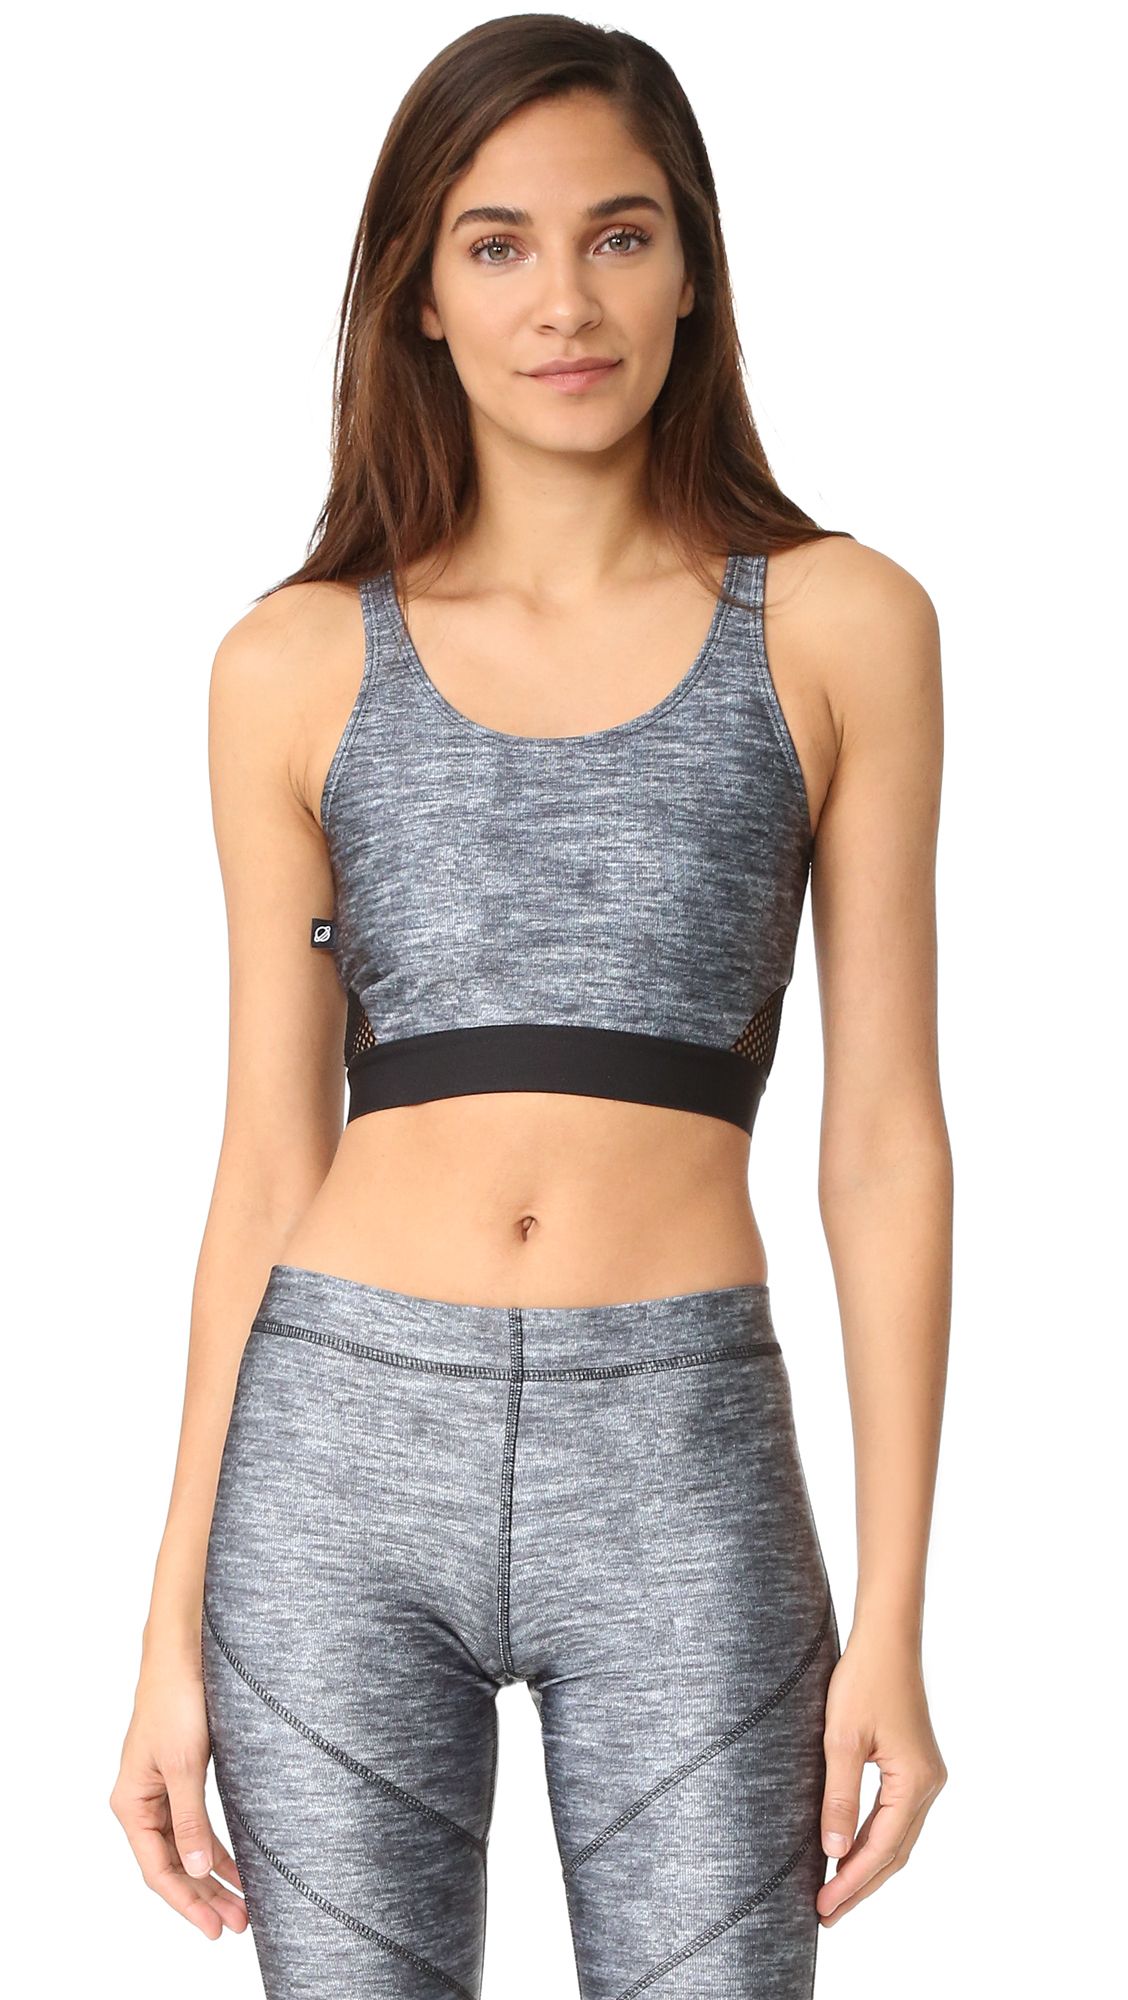 Heathered Crop Top with Fishnet | Shopbop